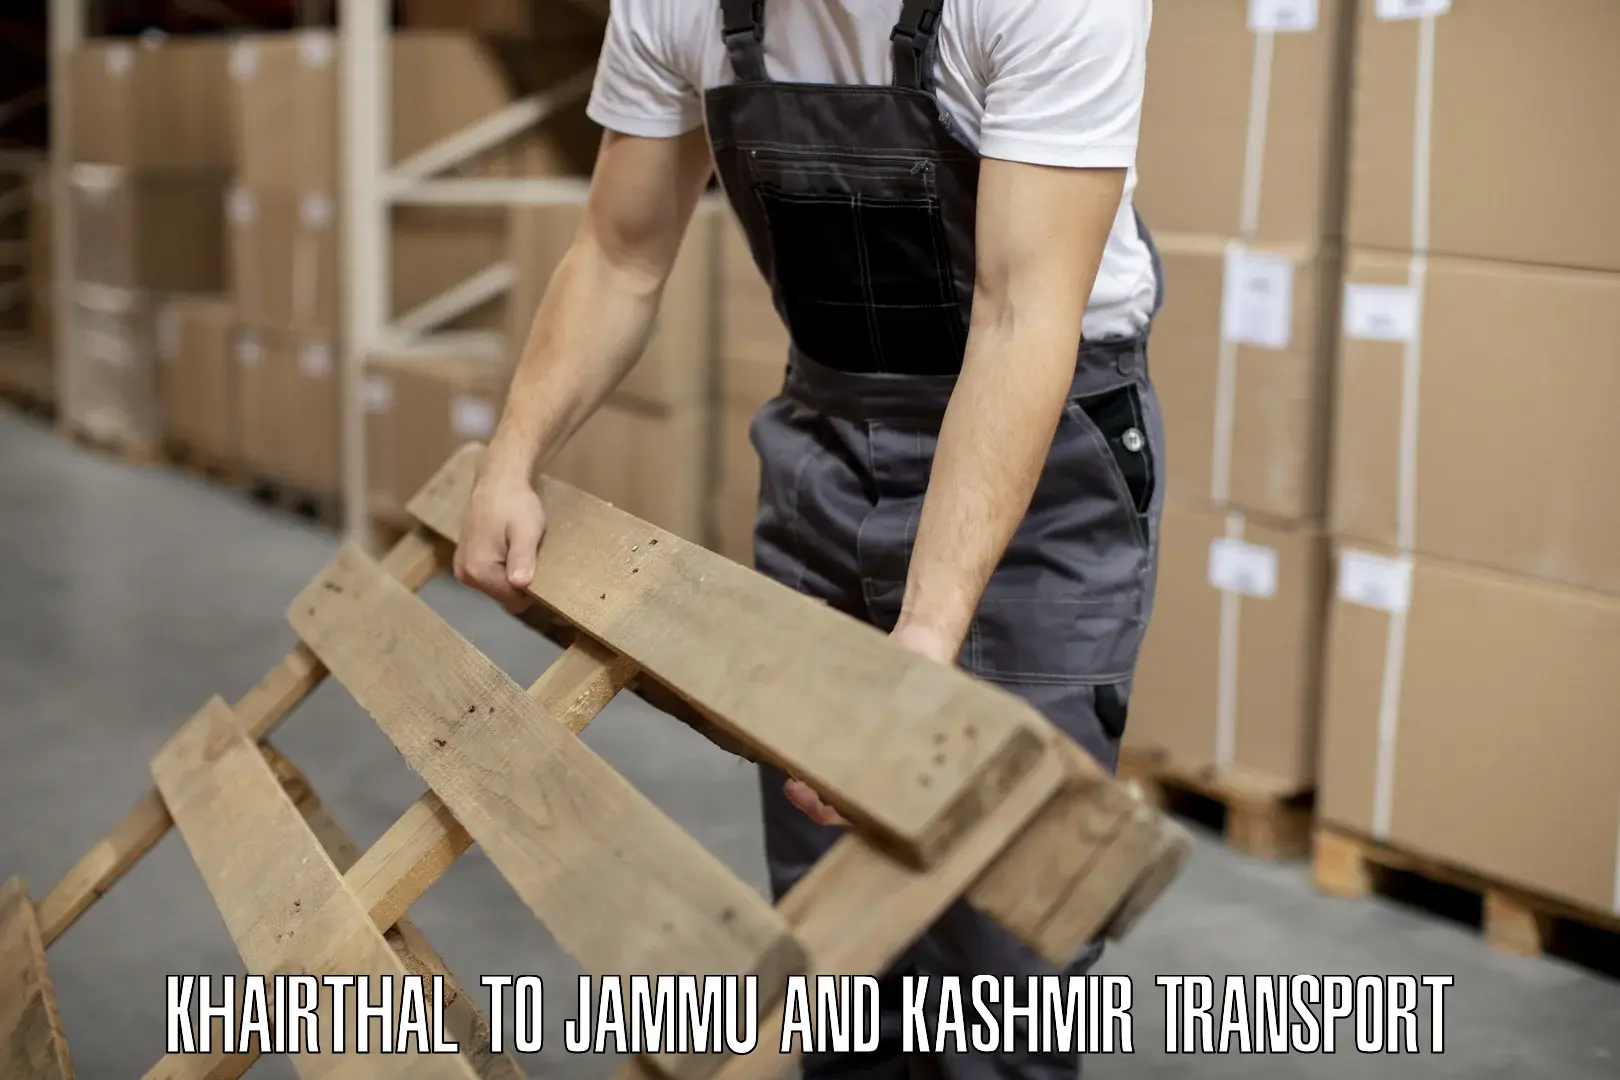 Container transport service Khairthal to Baramulla